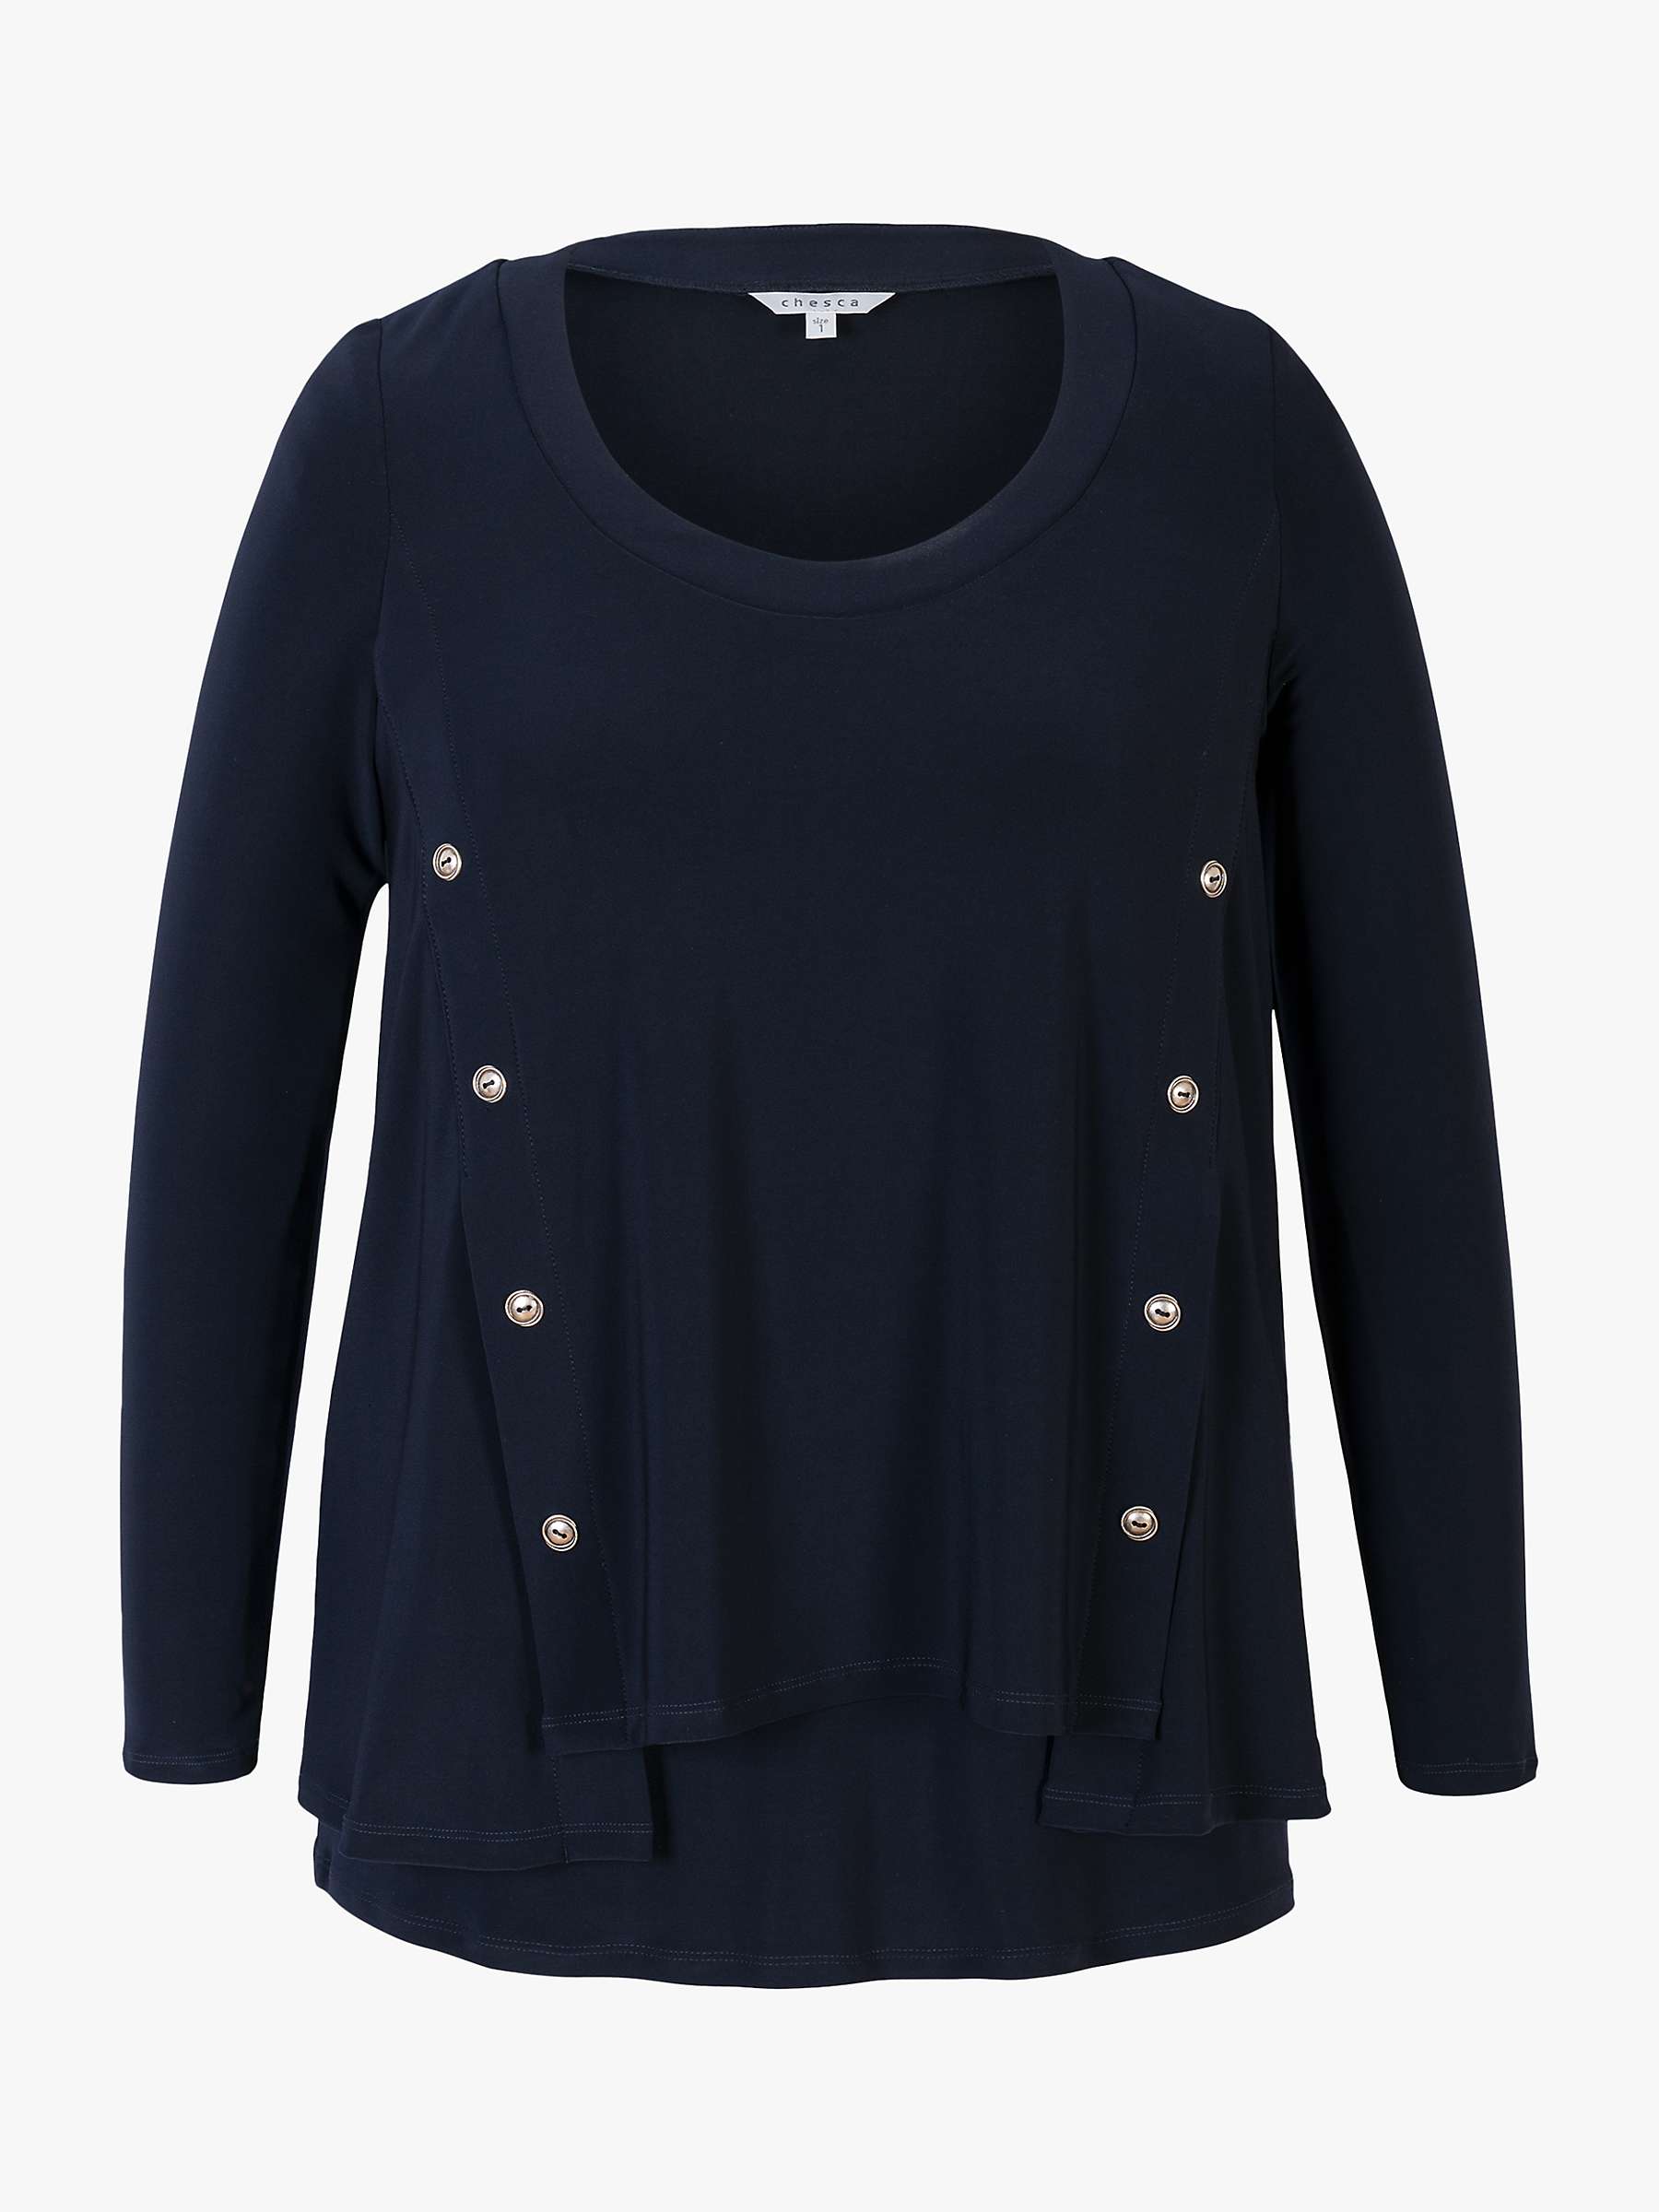 Buy chesca Button Trim Top, Navy Online at johnlewis.com